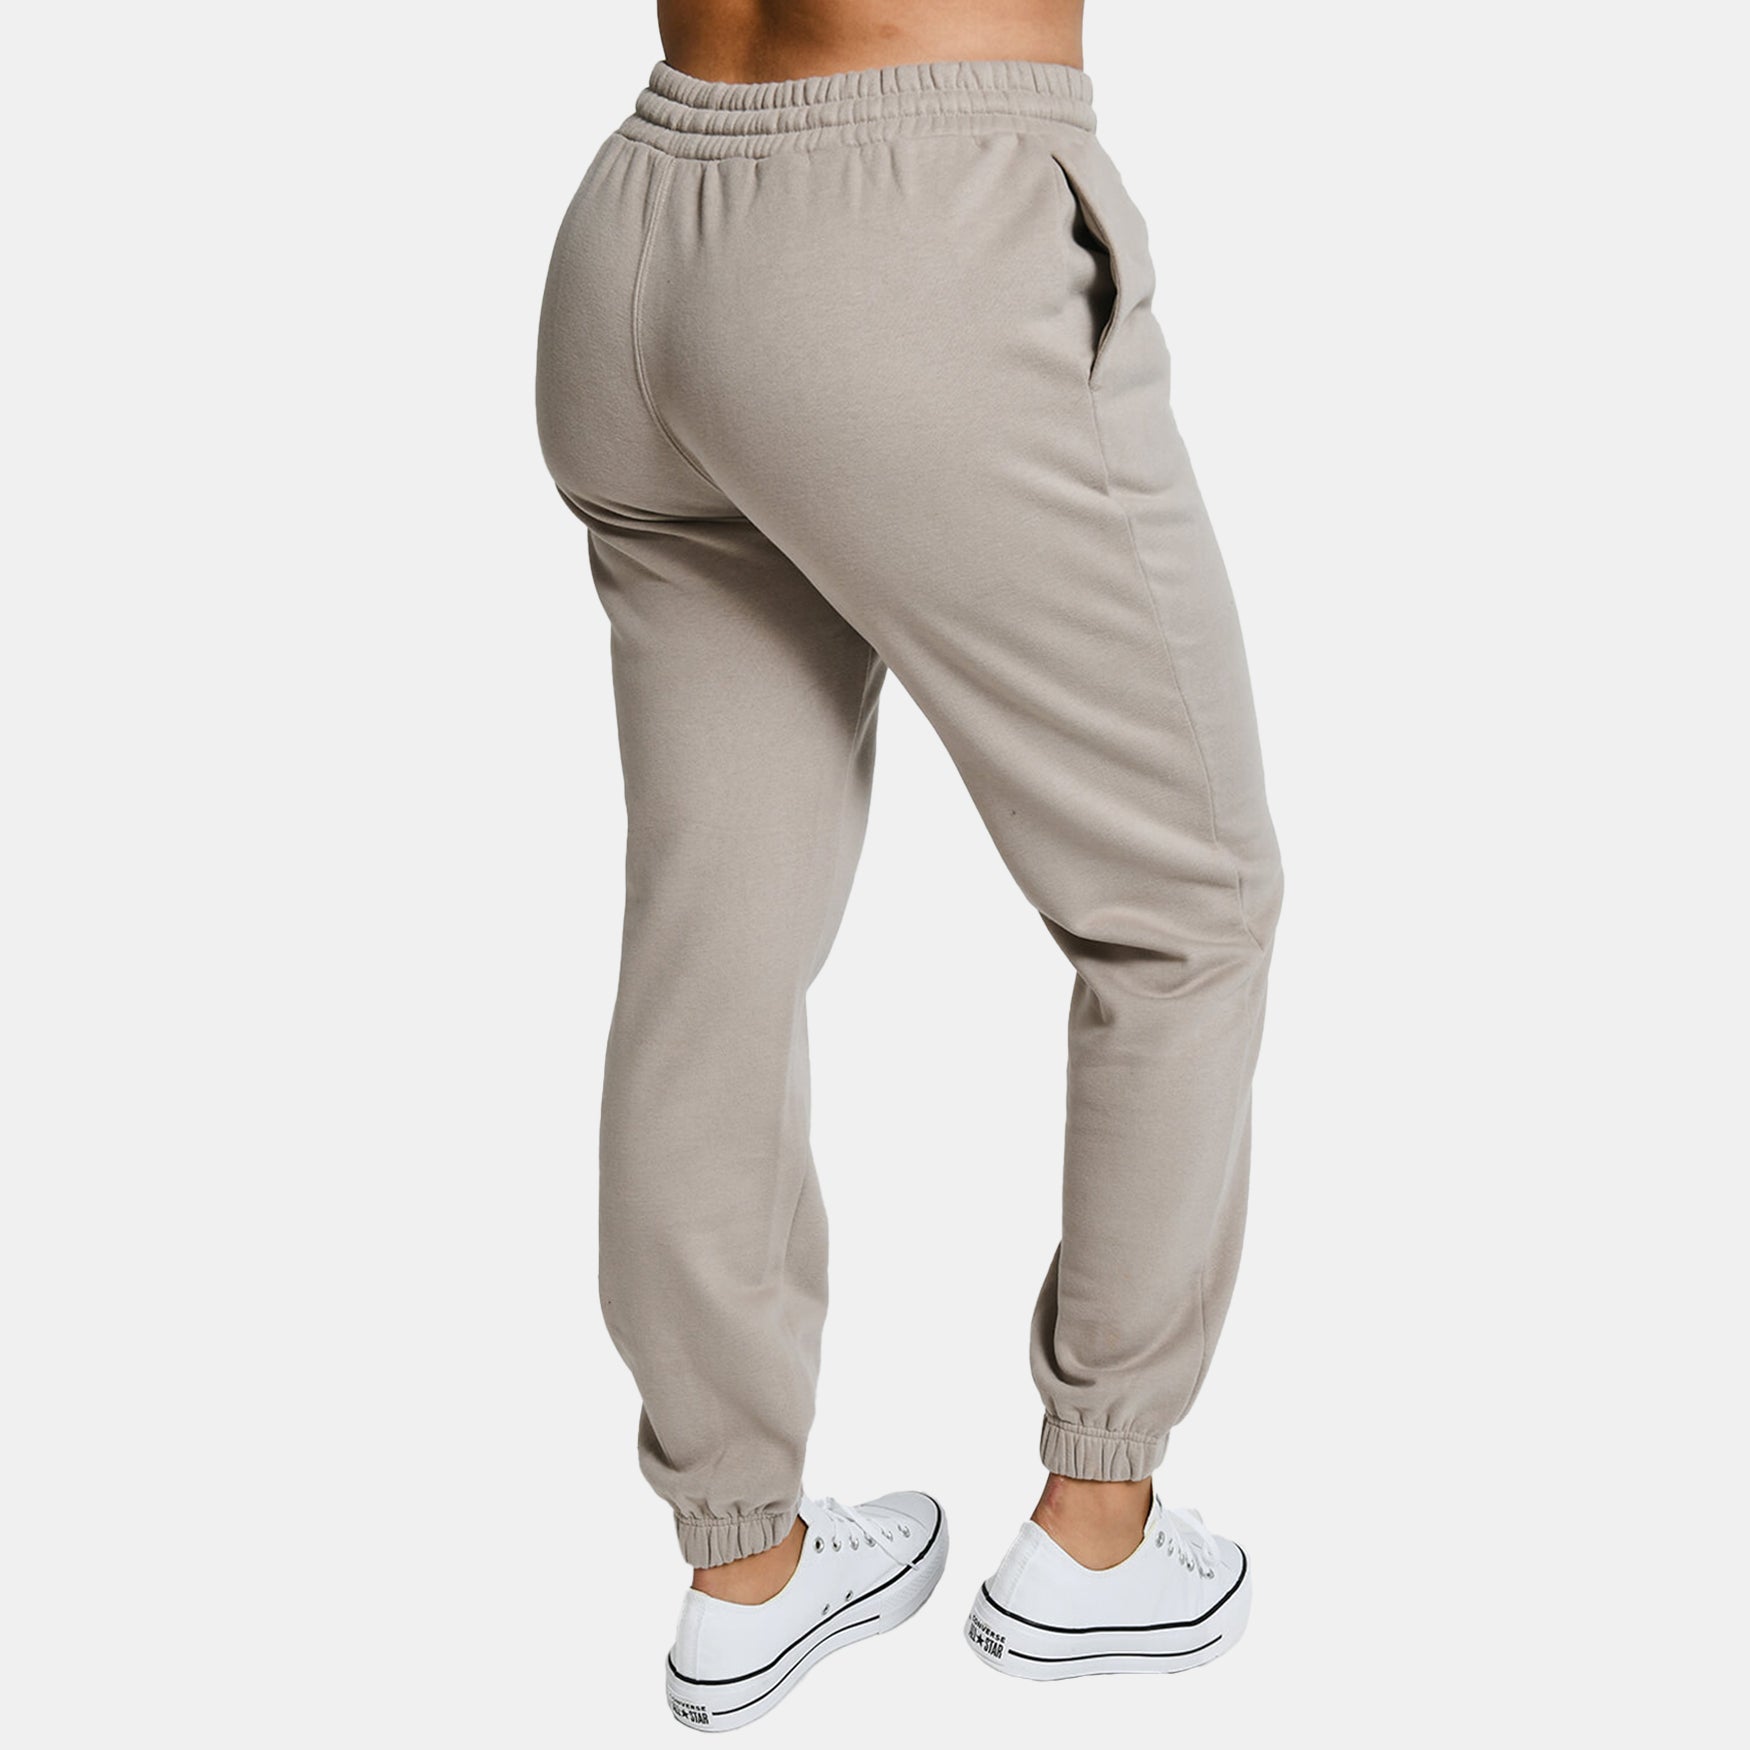 Grianlook Womens High Waisted Sweatpants Drawstring Jogger Sweat